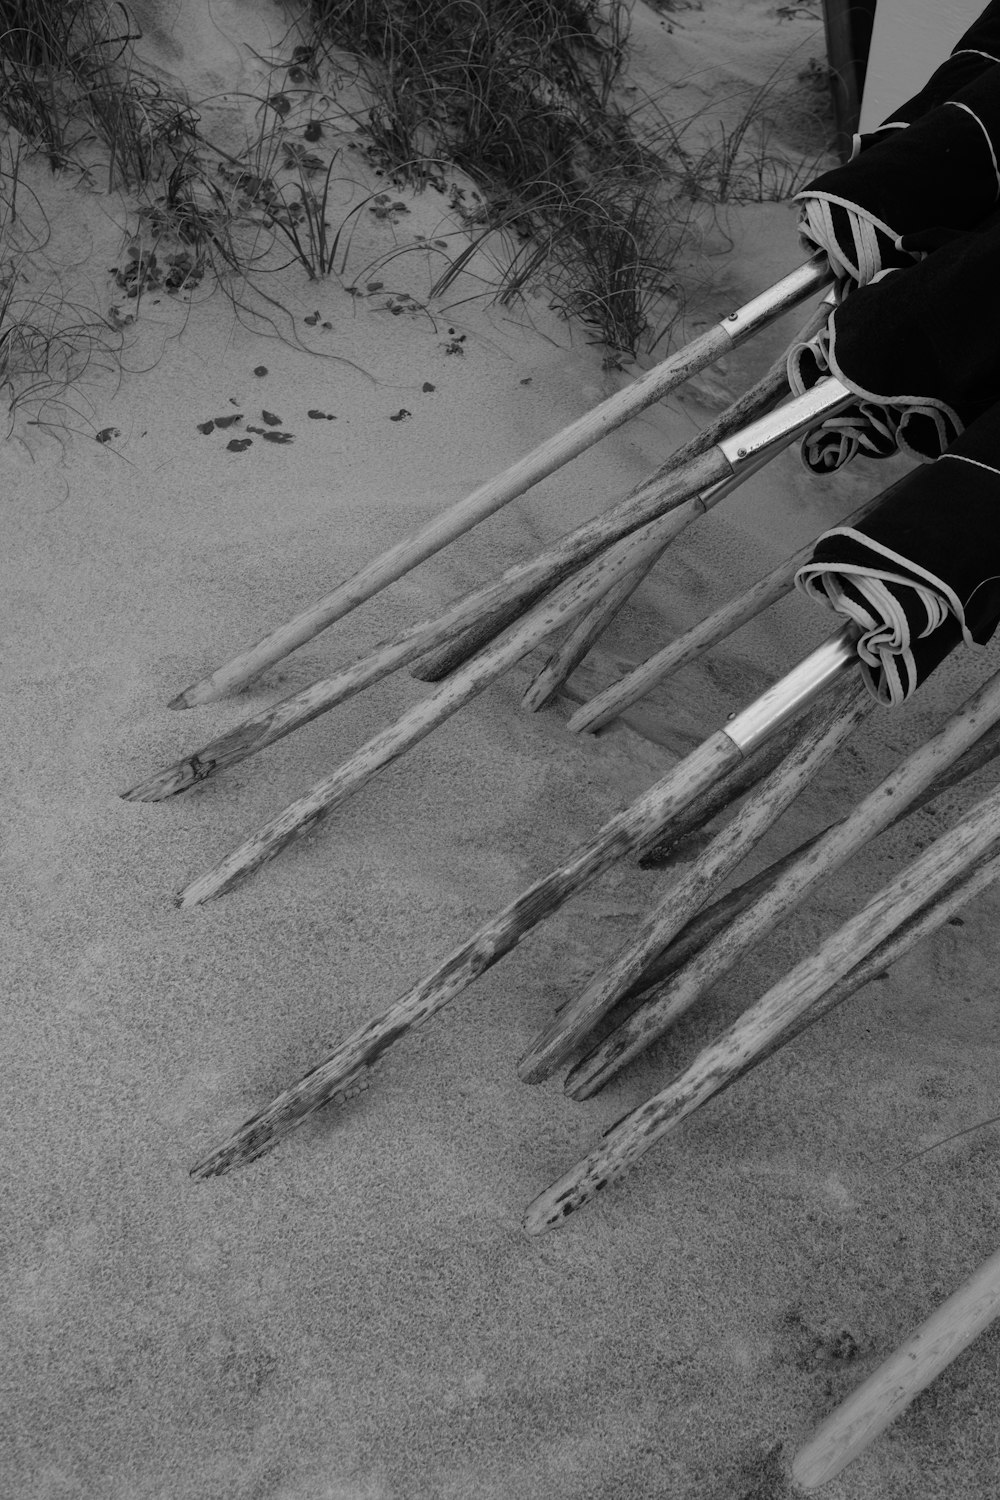 a group of skis sitting on top of a sandy beach